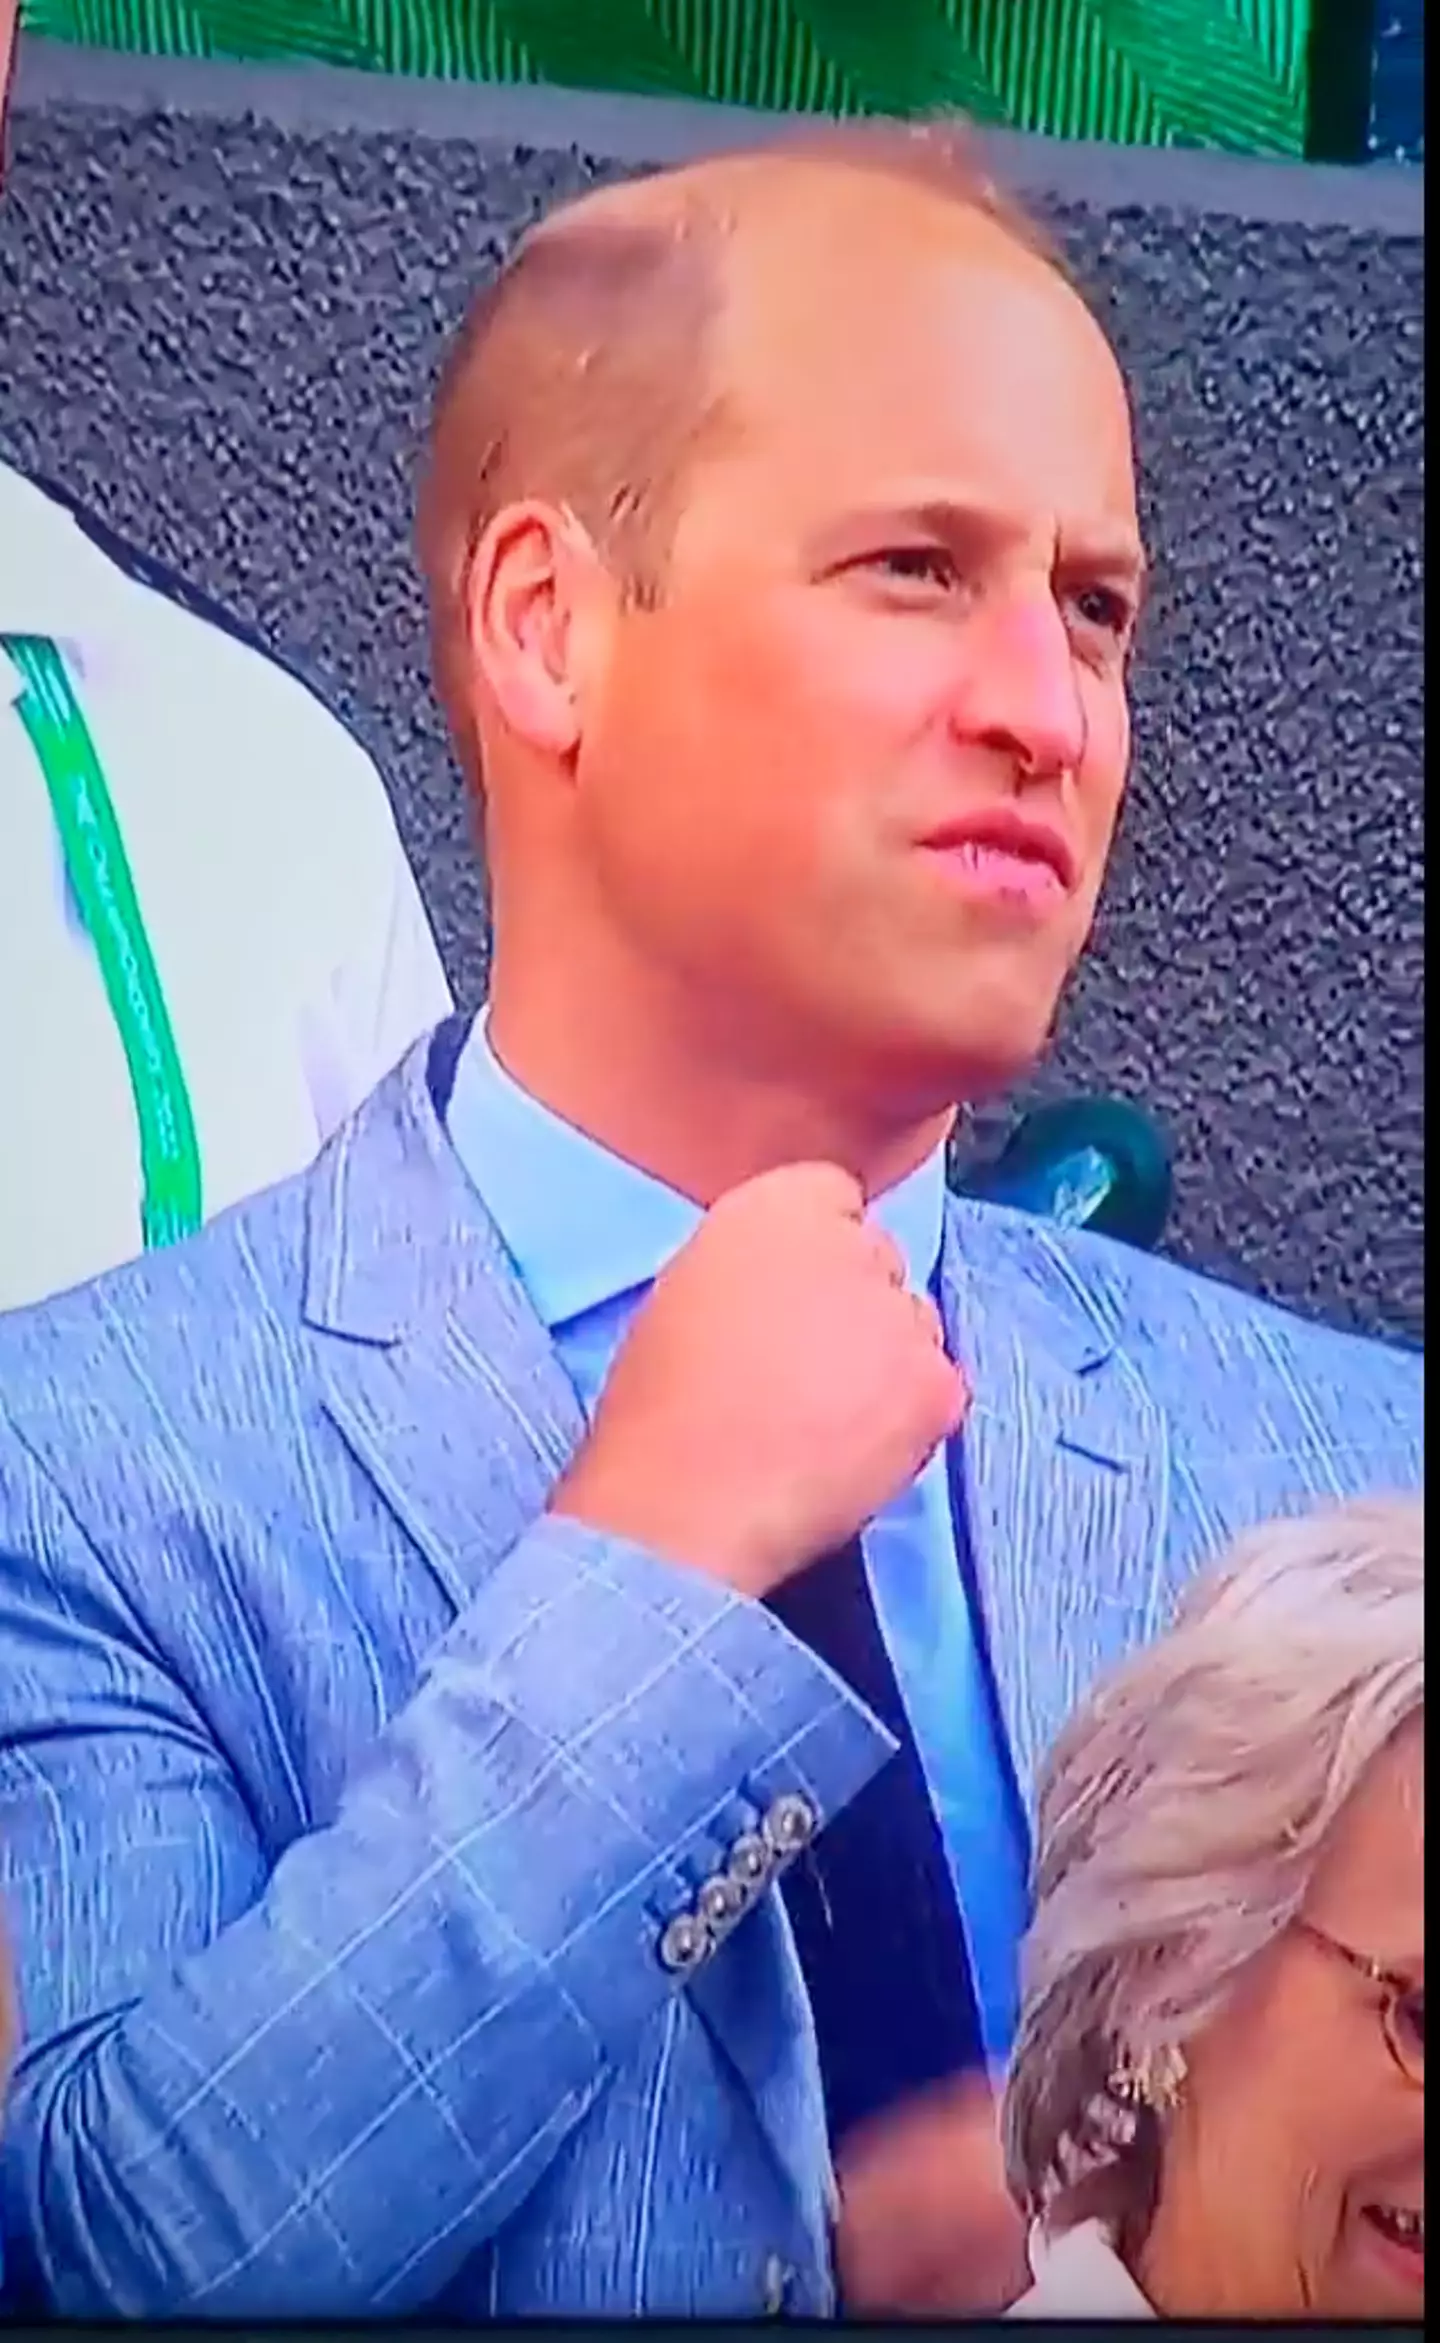 William appeared to almost swear in public while at Wimbledon.